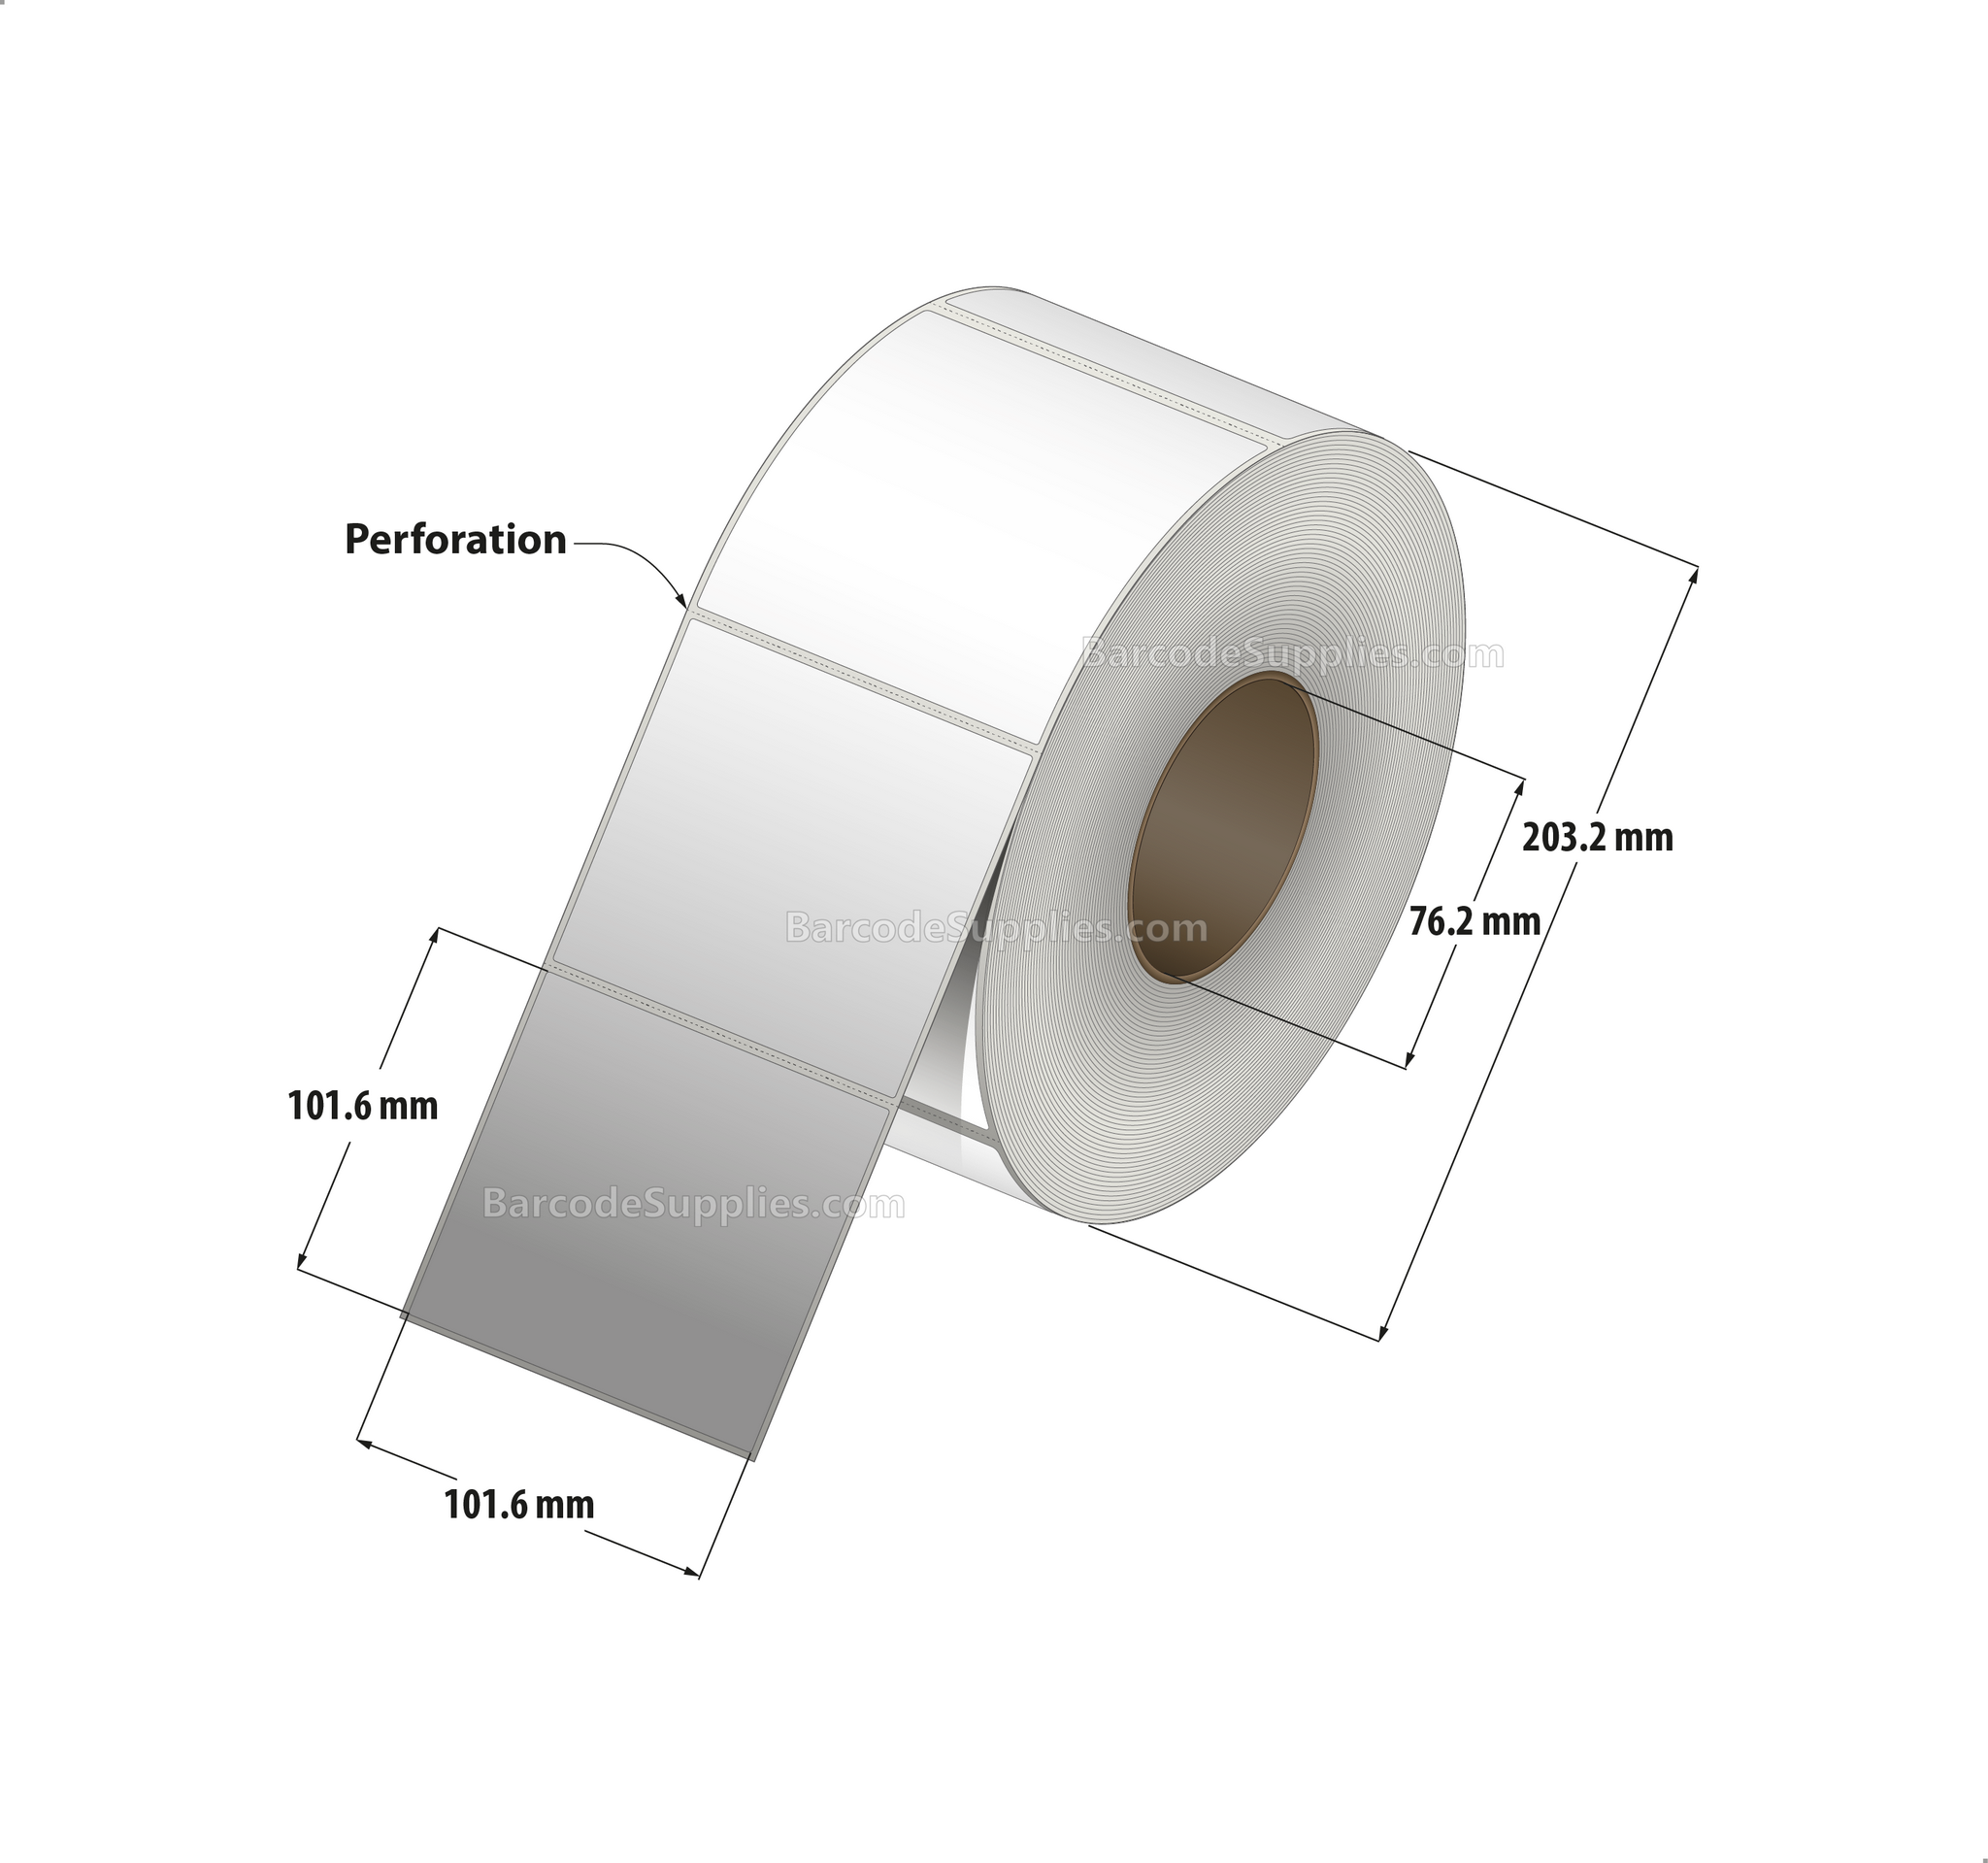 4 x 4 Thermal Transfer White Labels With Permanent Acrylic Adhesive - Perforated - 1500 Labels Per Roll - Carton Of 4 Rolls - 6000 Labels Total - MPN: TH44-1P